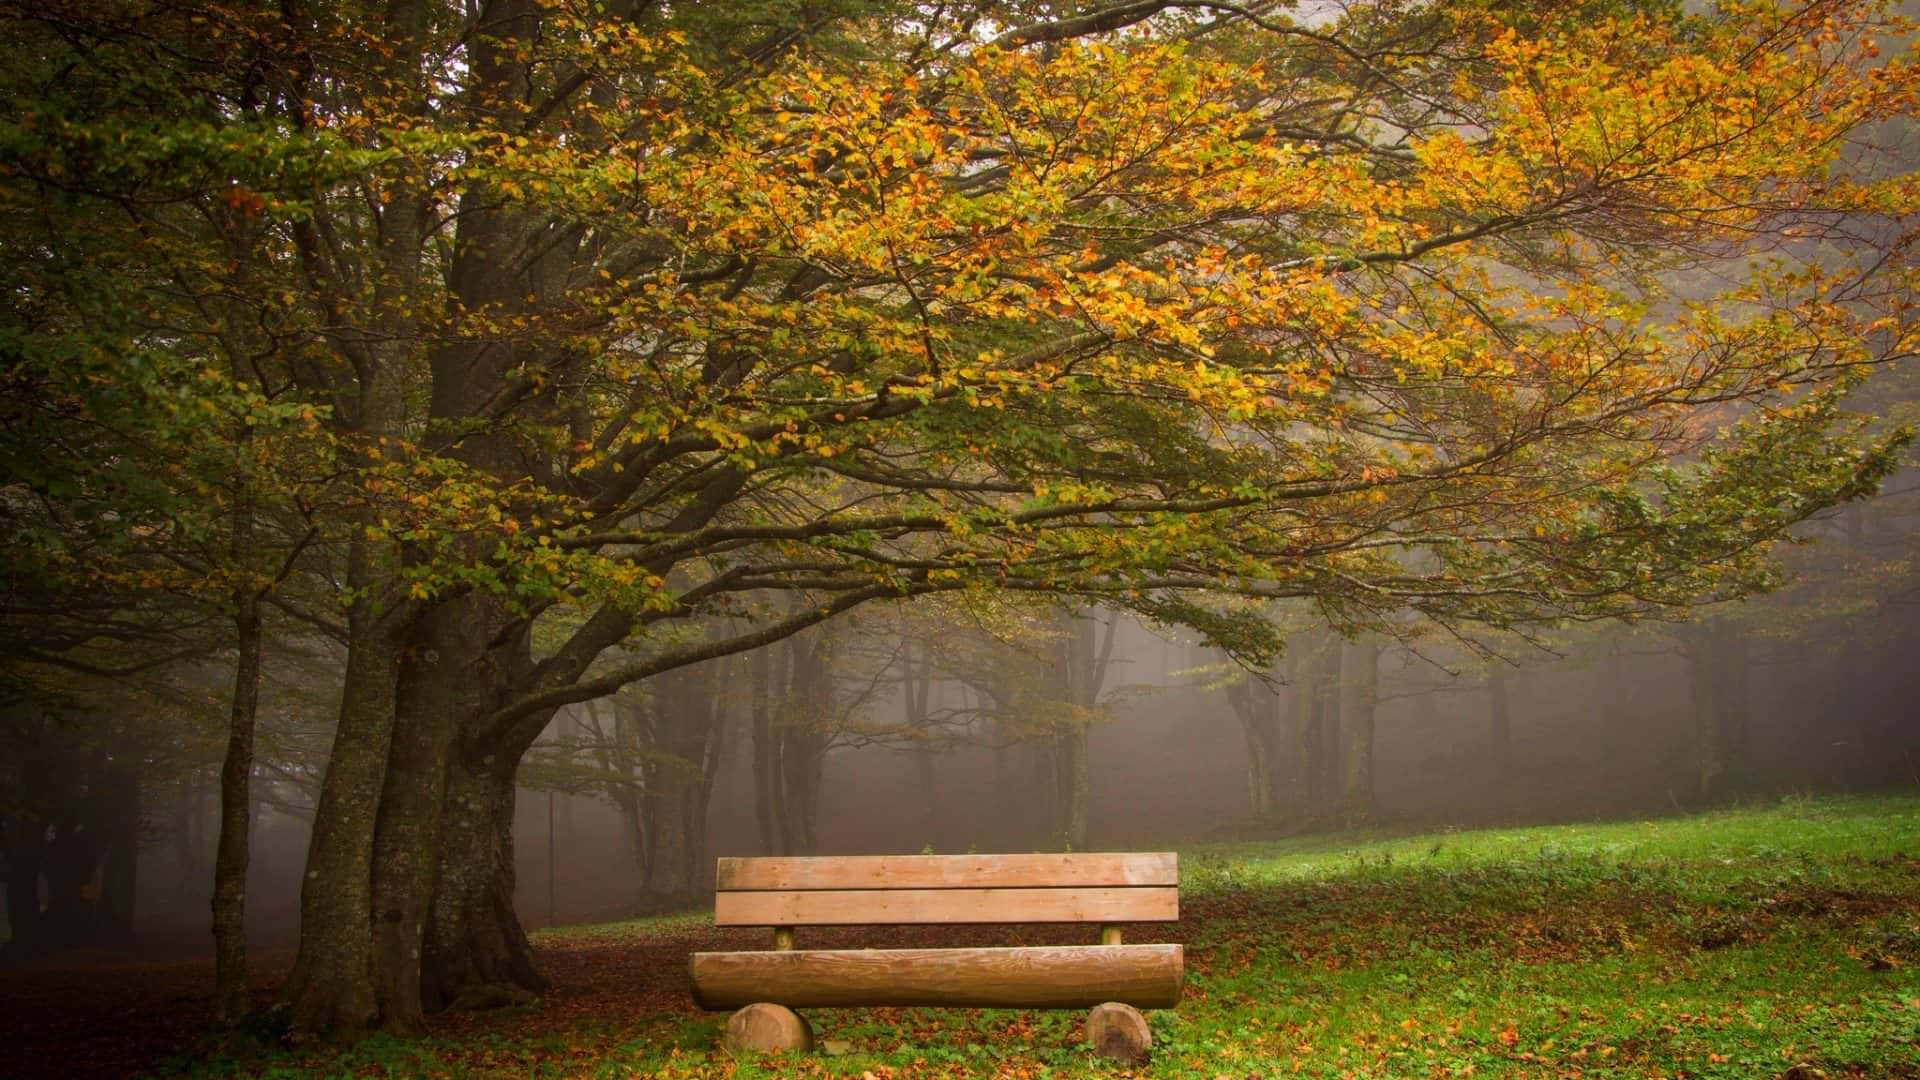 A Bench In A Foggy Forest